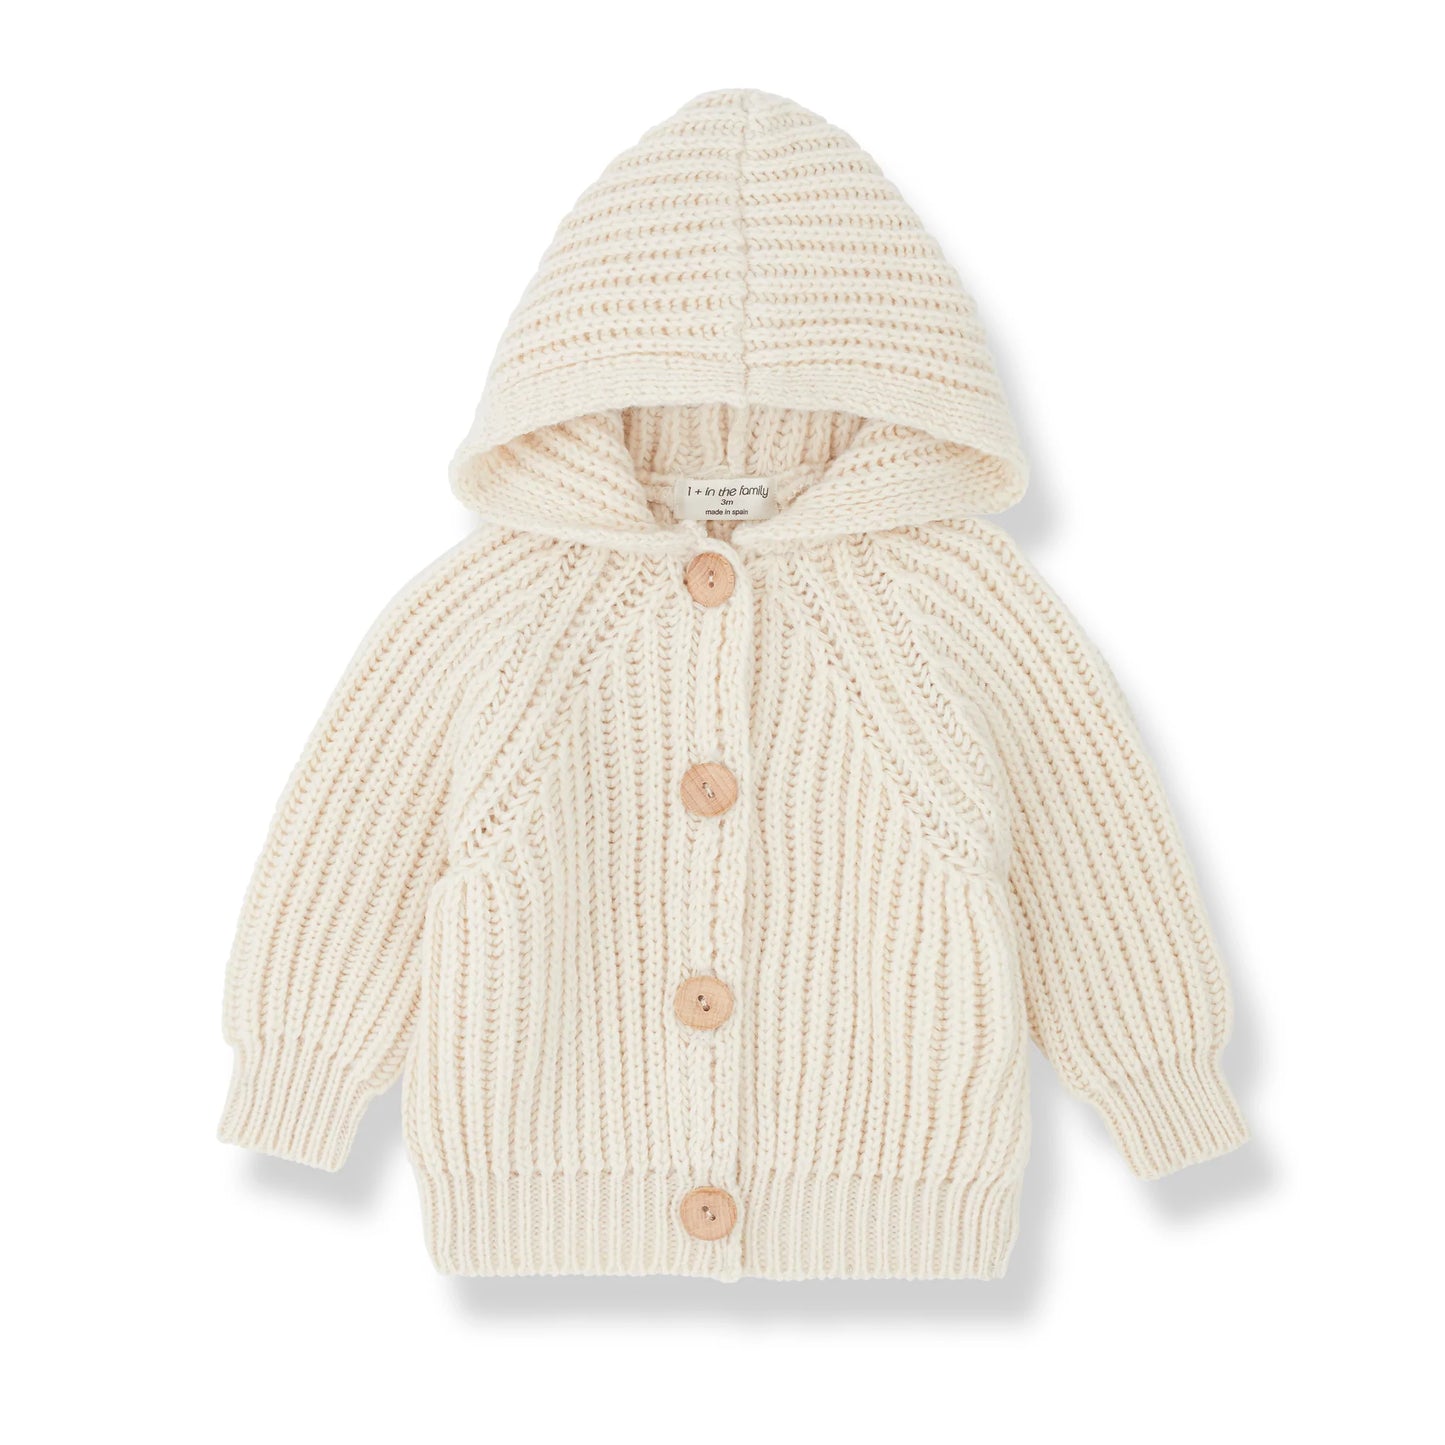 Ecru Knit Jacket - One More in the Family